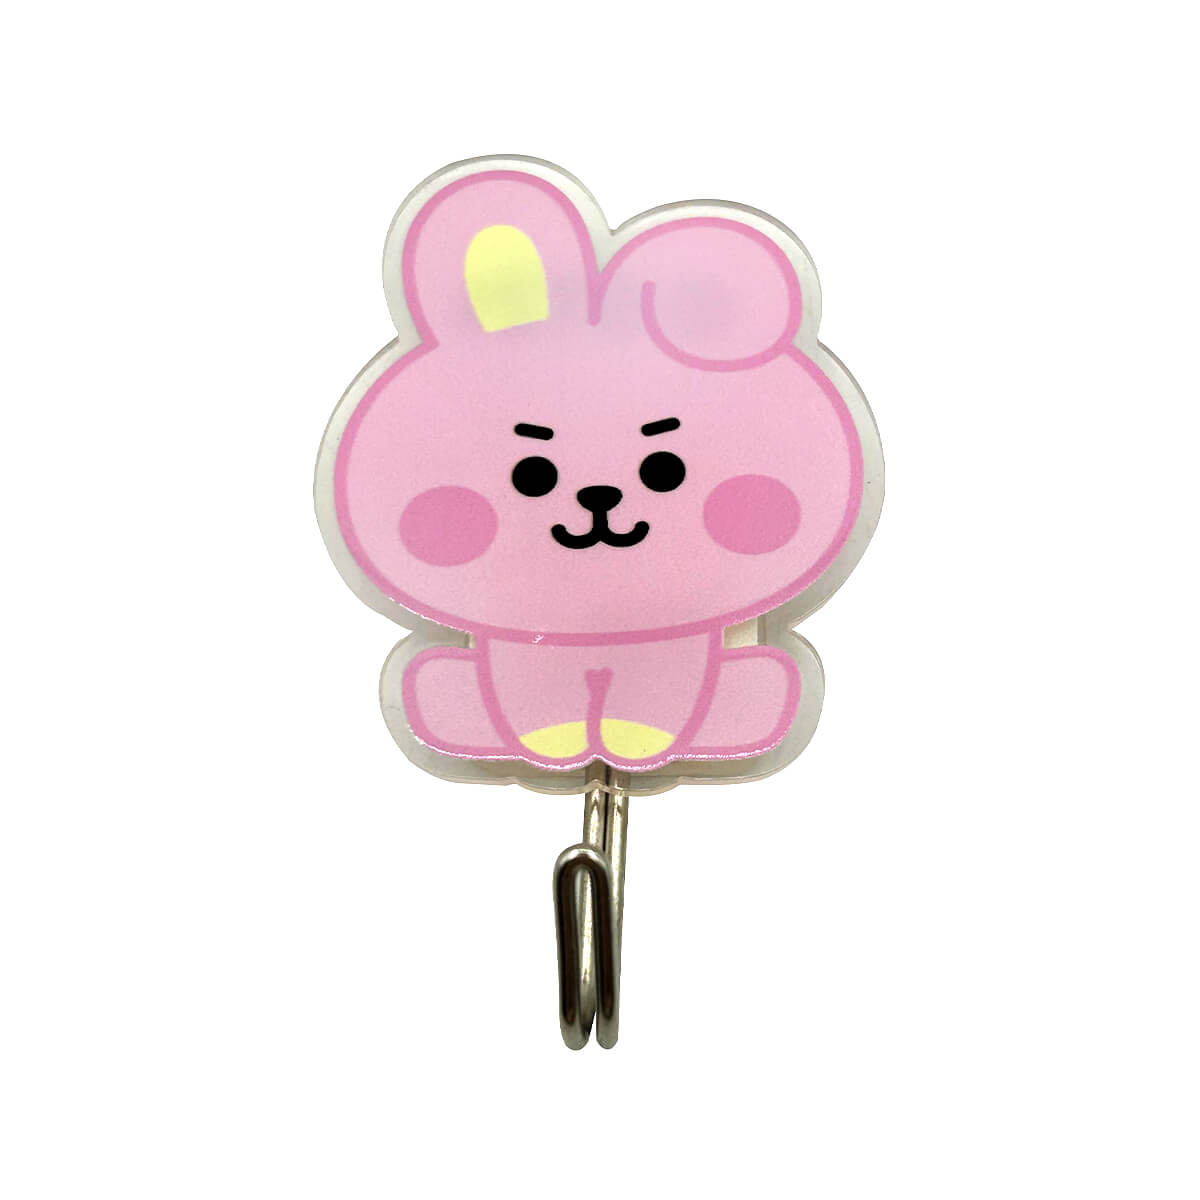 BT21 COOKY BABY Adhesive Wall Hook